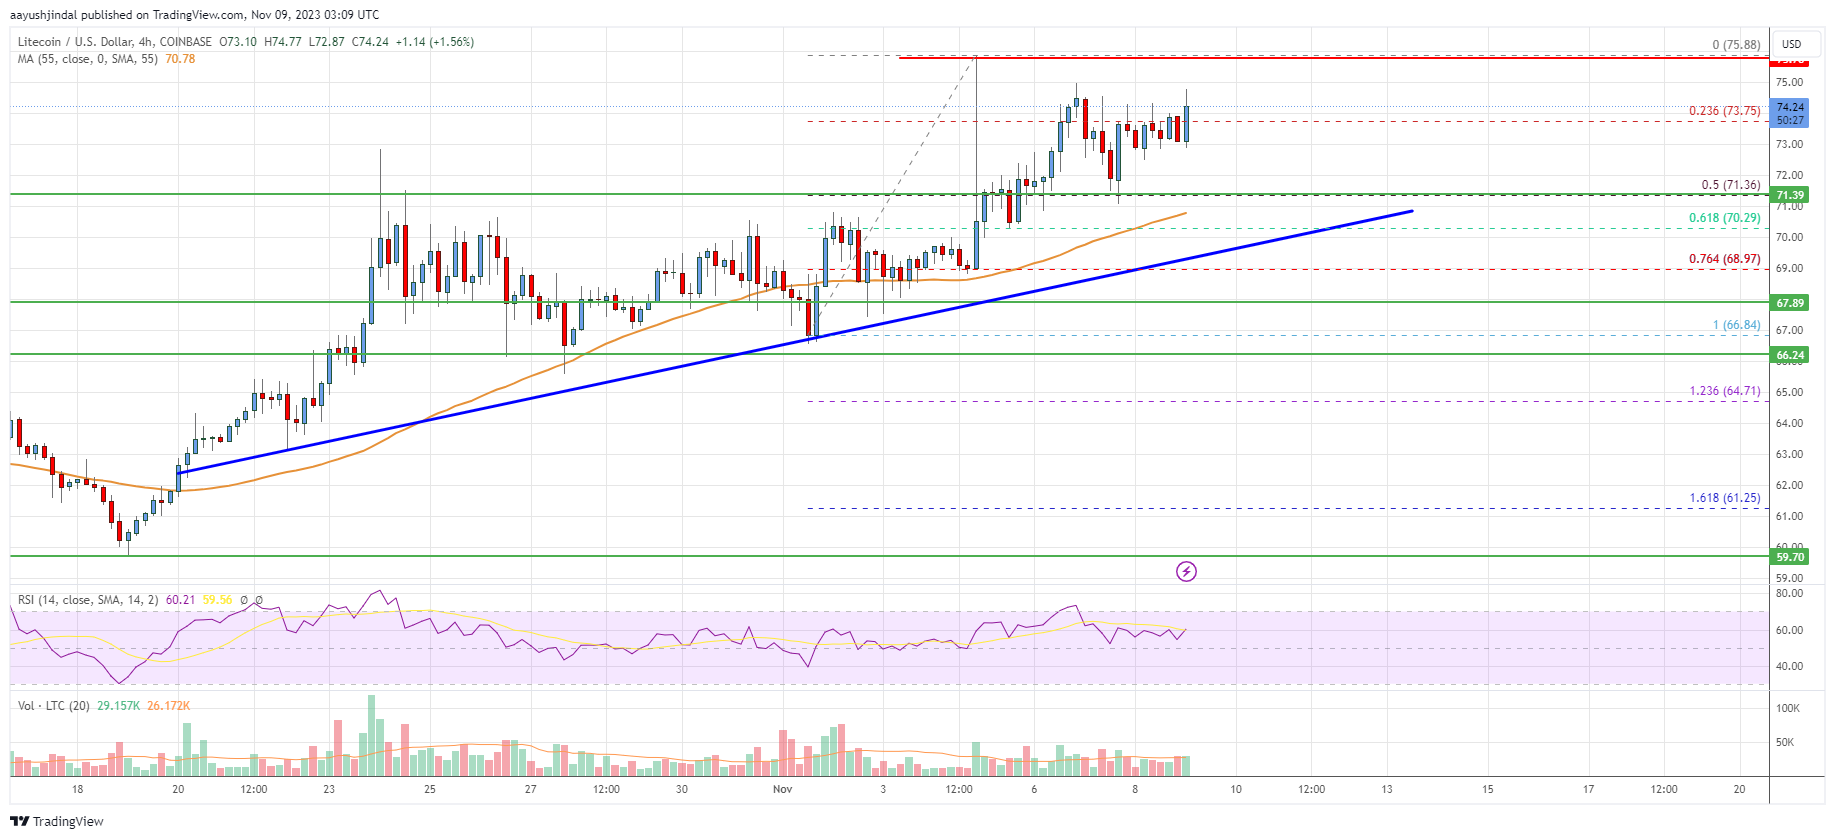 Litecoin (LTC) Price Analysis: Another 10% Rally Seems Likely